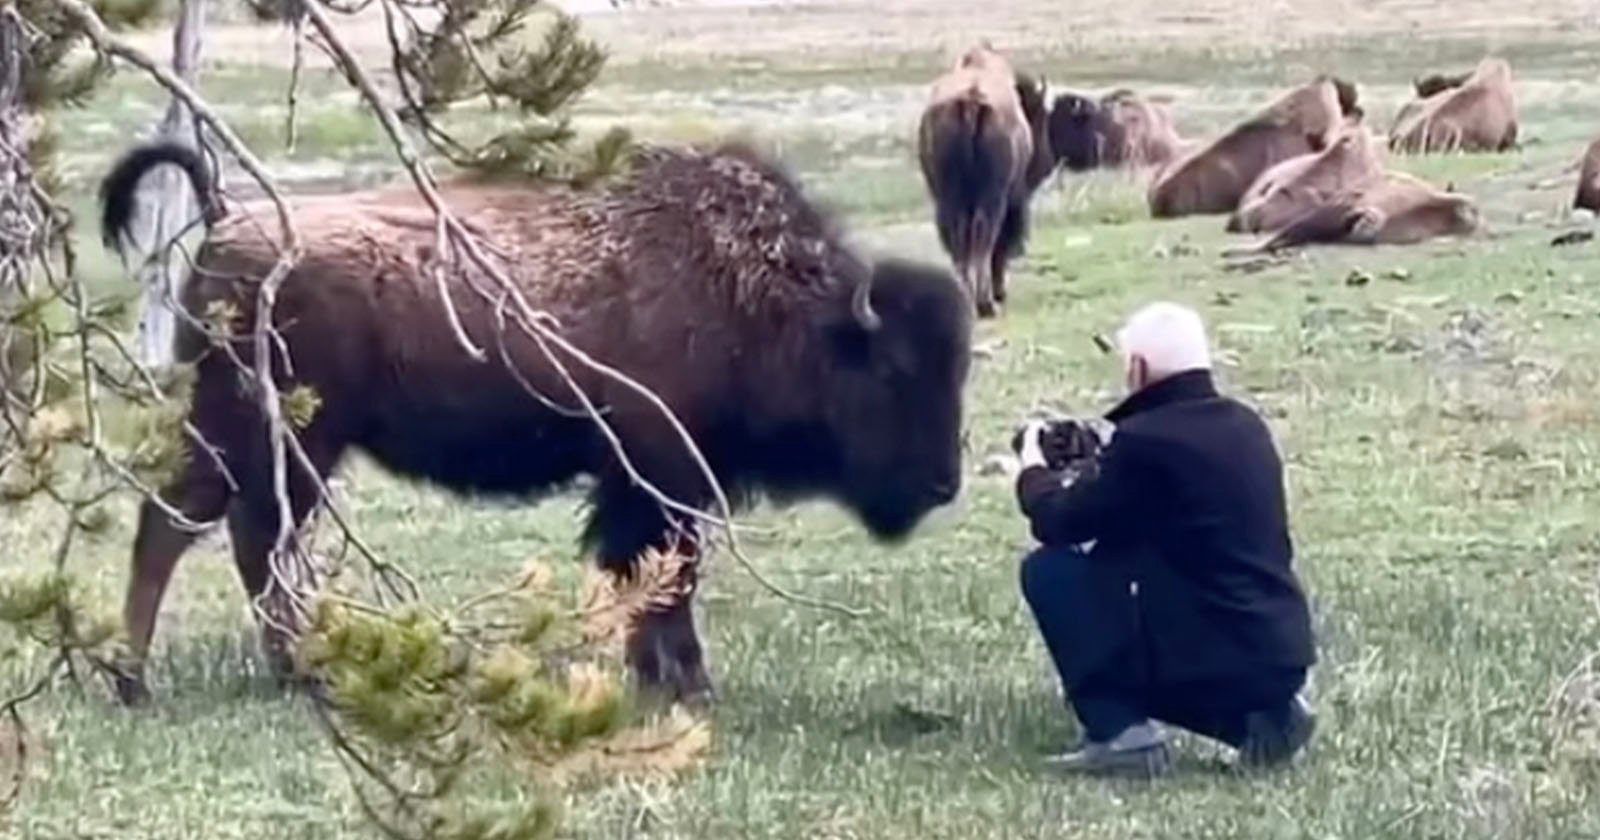 Photographer Gets Way Too Close to Bison in Yellowstone Park